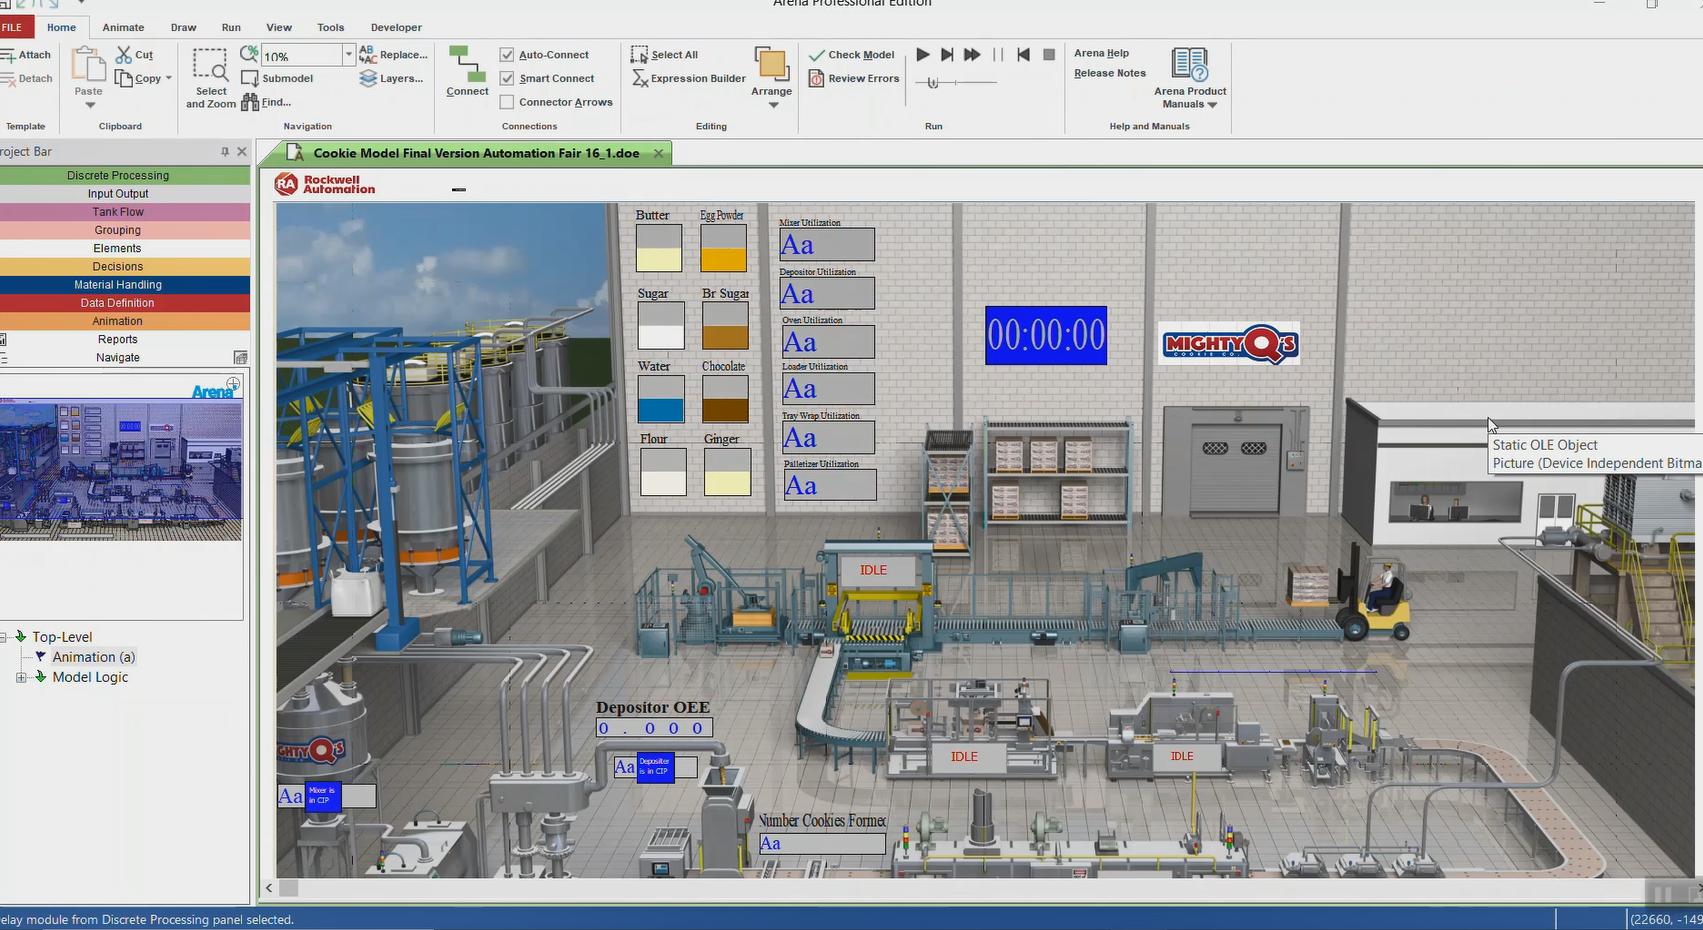 Inventory Management using Rockwell's Arena Simulation and Process Analyzer  